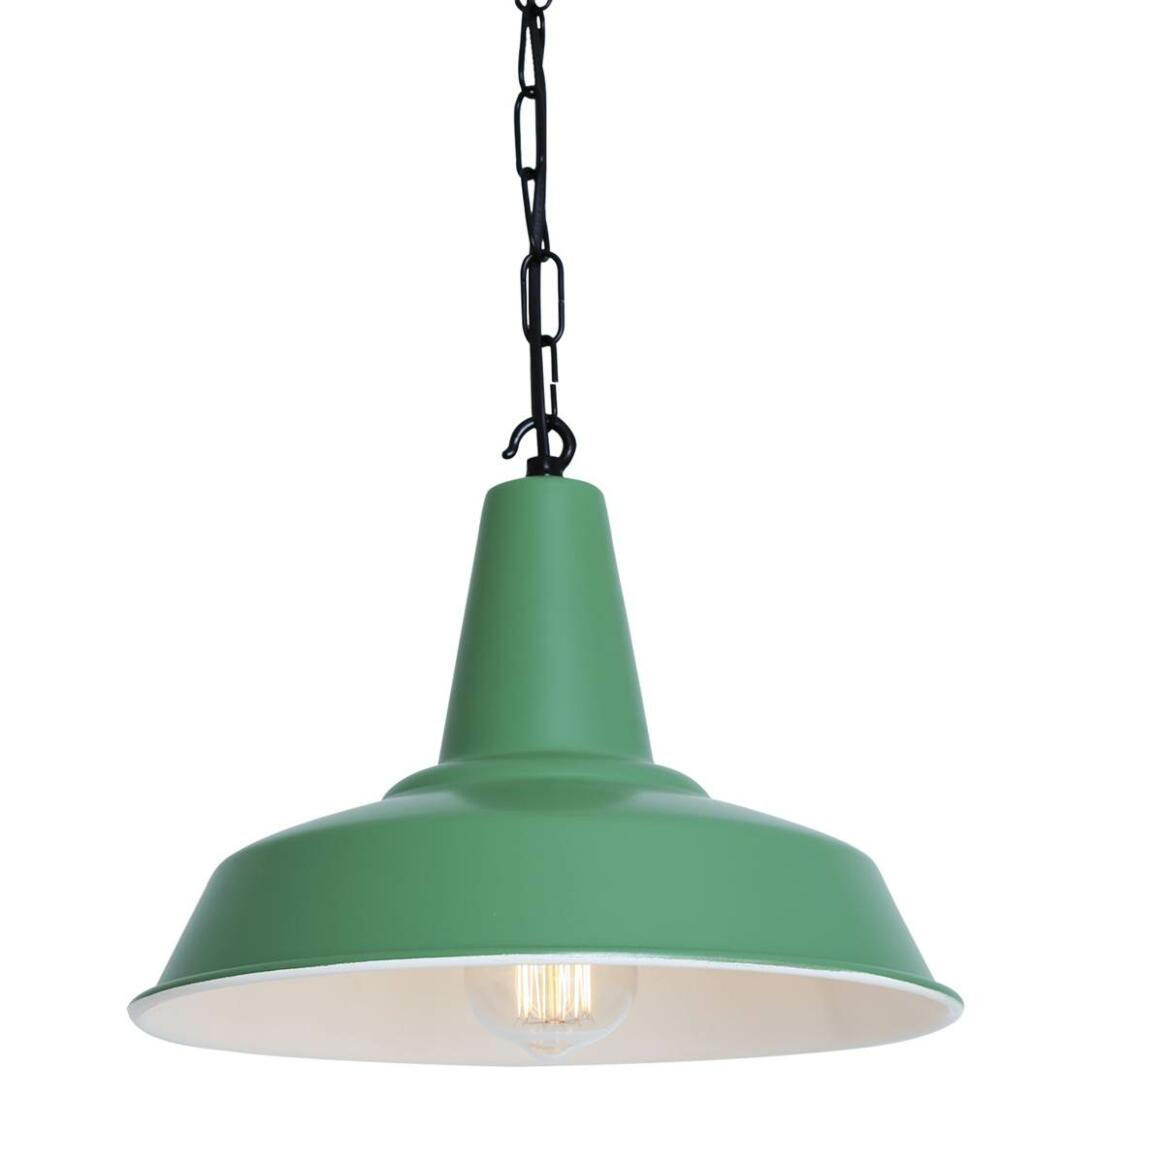 Hex Industrial Factory Pendant Light 11.8" main product image